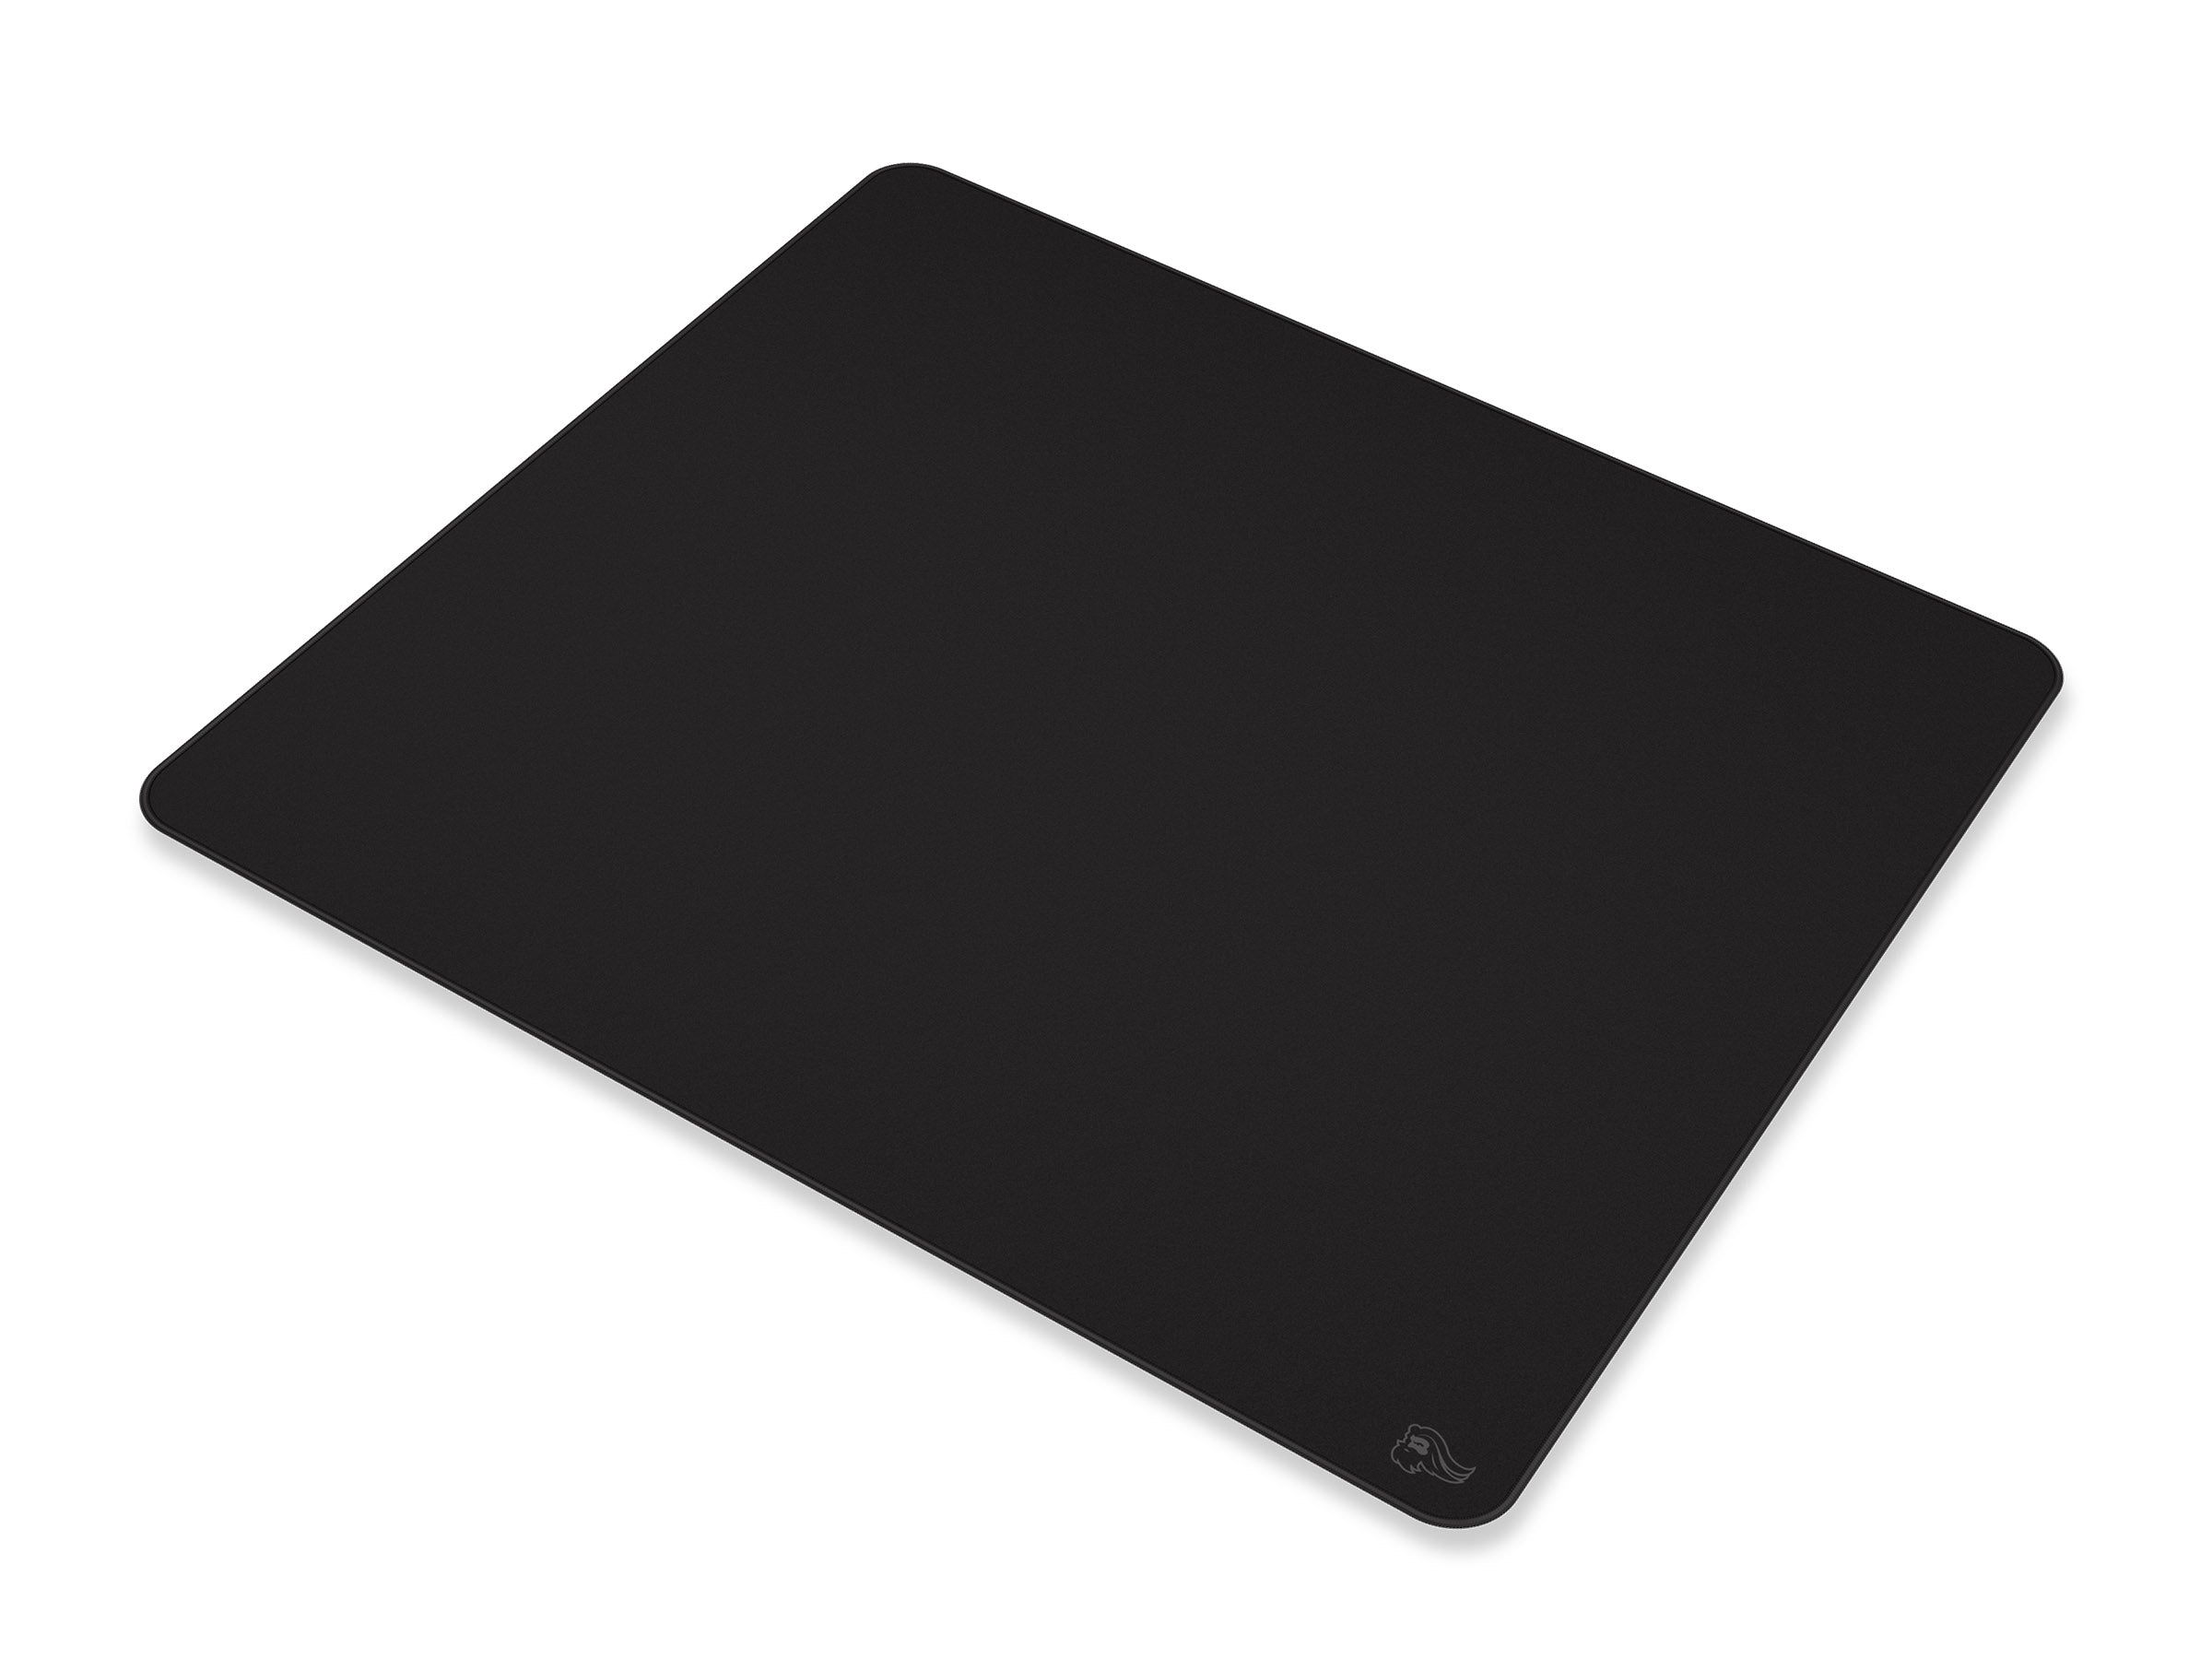 Glorious PC Heavy XL Stealth Desk / Mouse Pad MKIKU3W1S8 |27434|